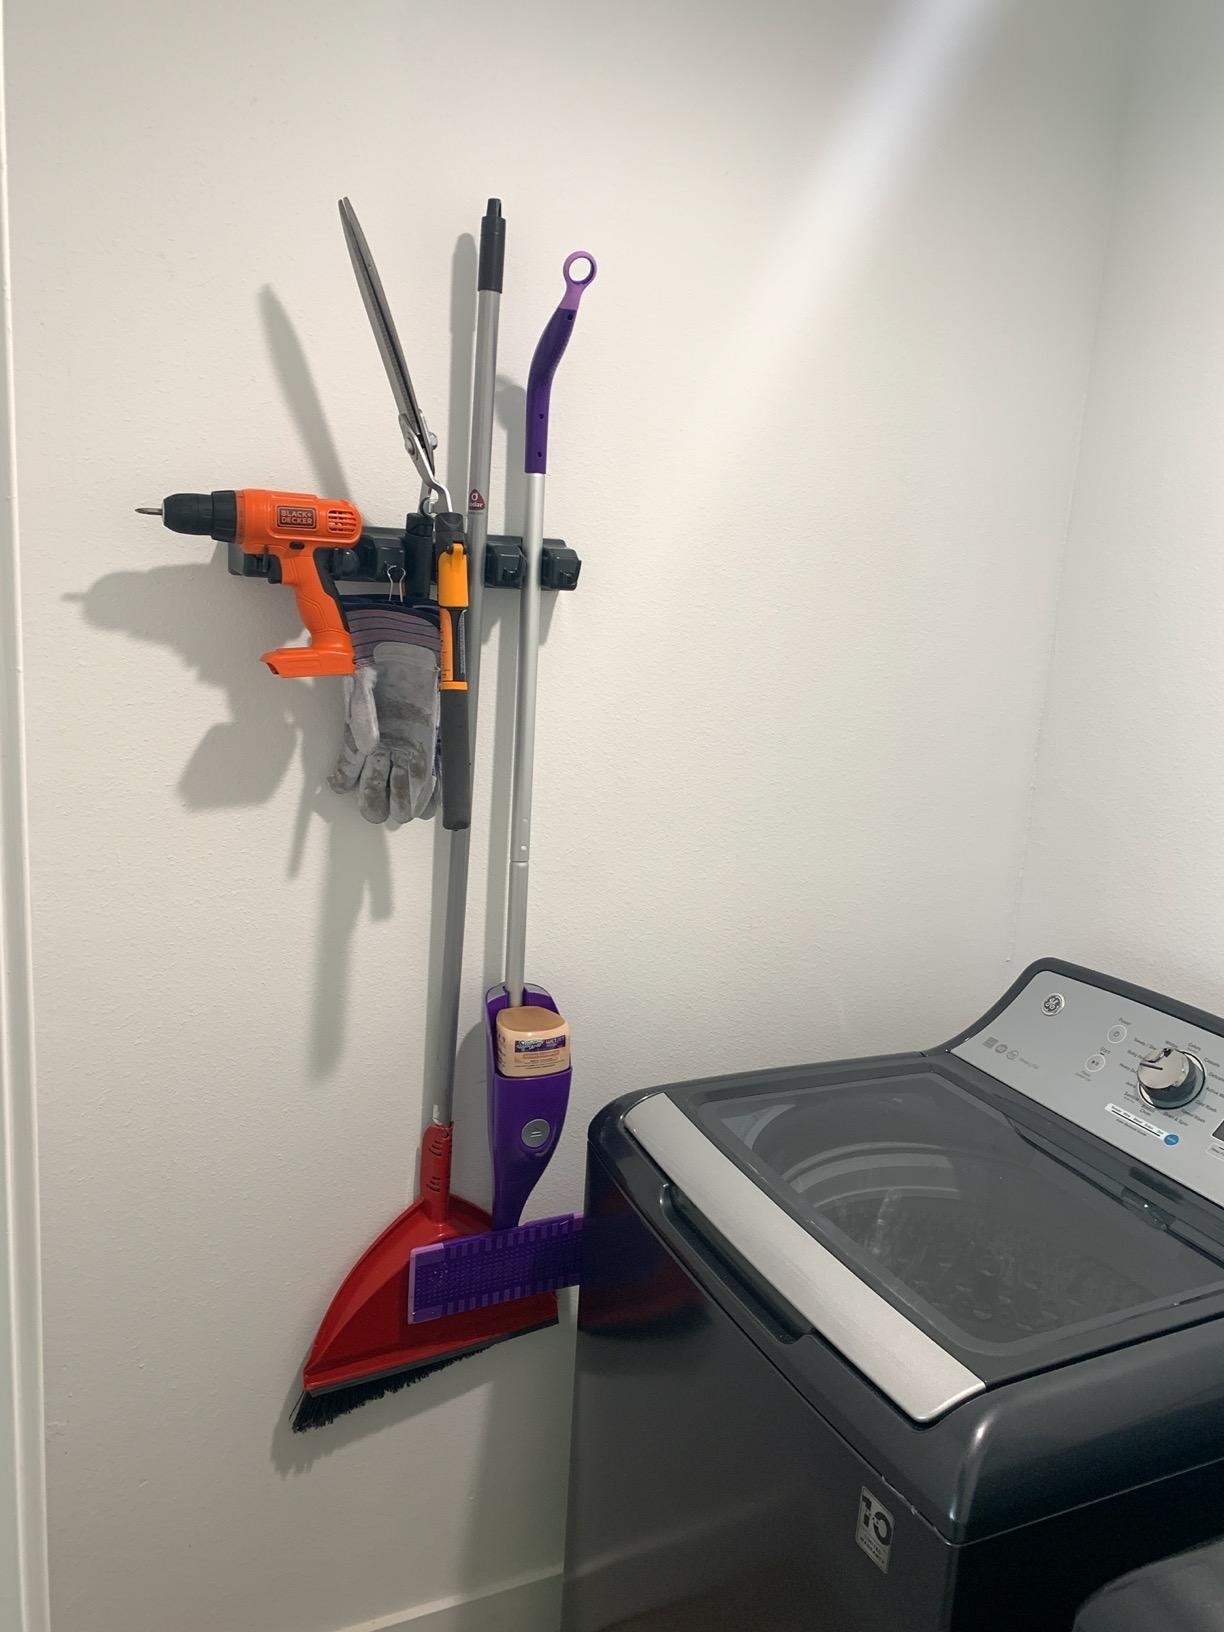 reviewer photo showing the organizer with a broom, Swiffer, and even a drill attached to it